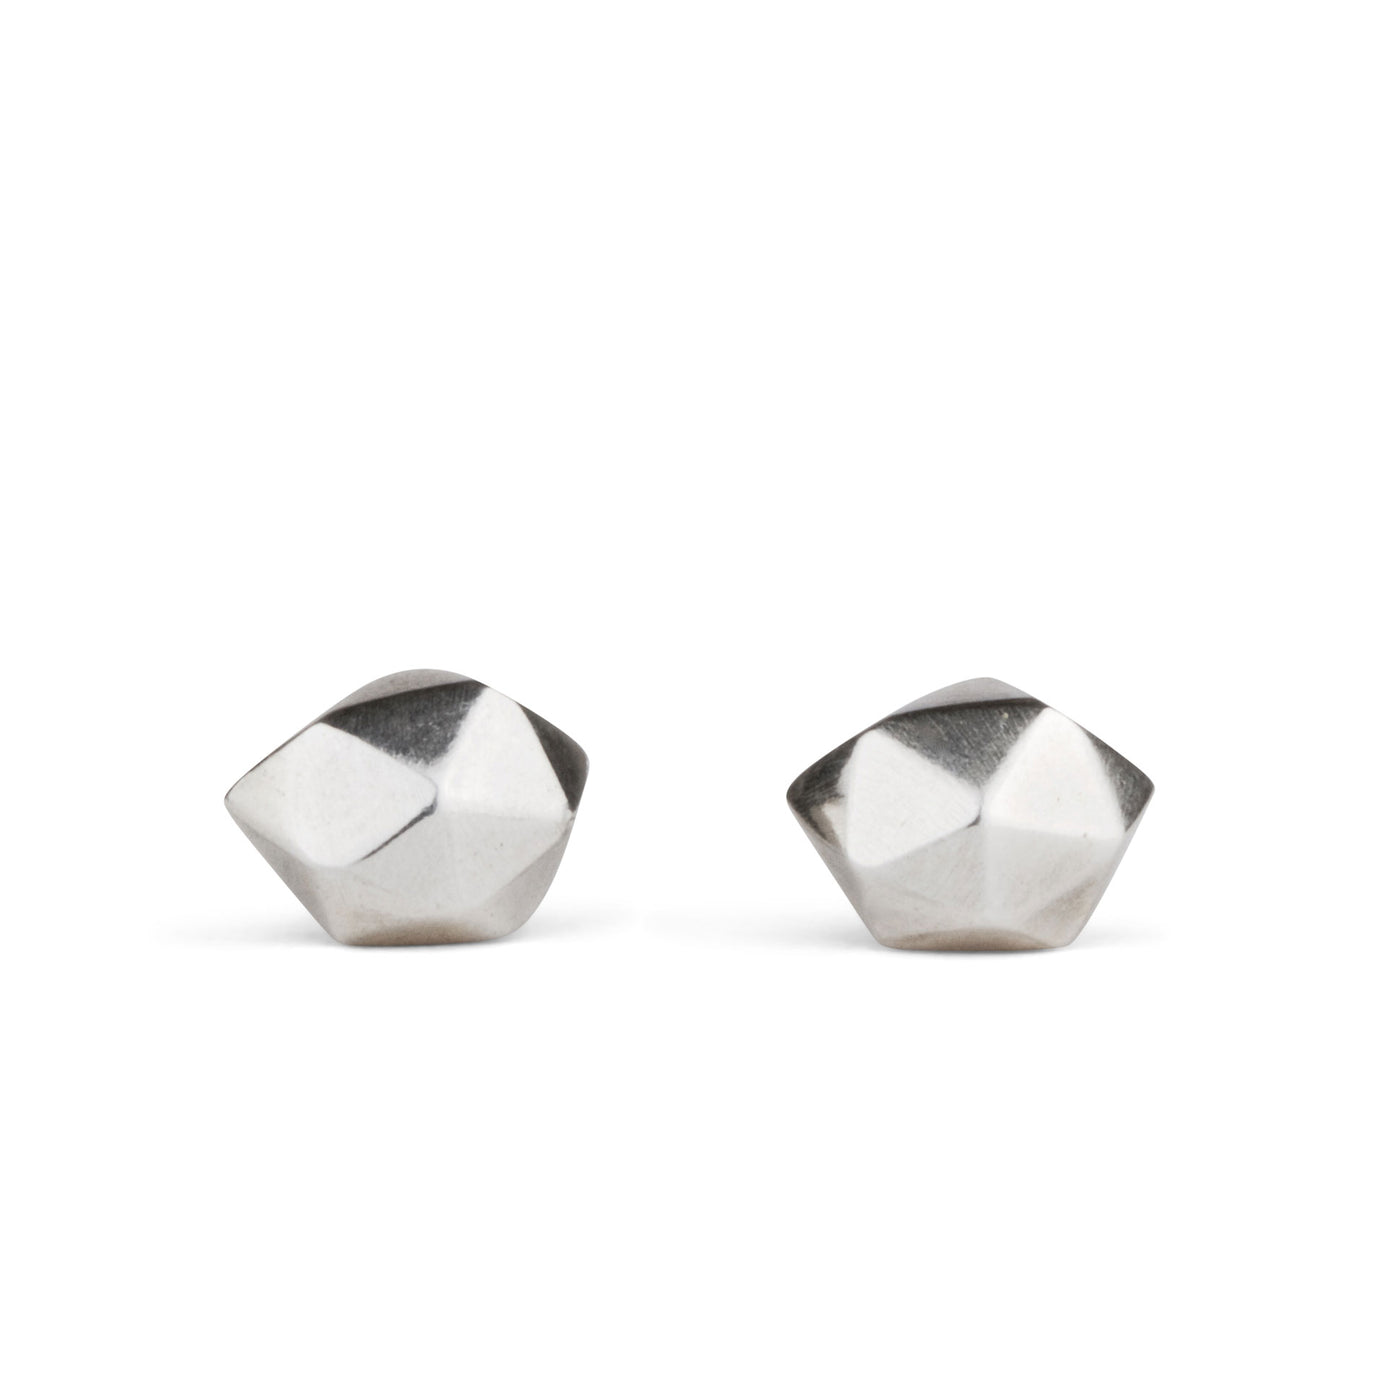 Sterling silver wabi-sabi faceted geometric stud earrings by Corey Egan on a white background